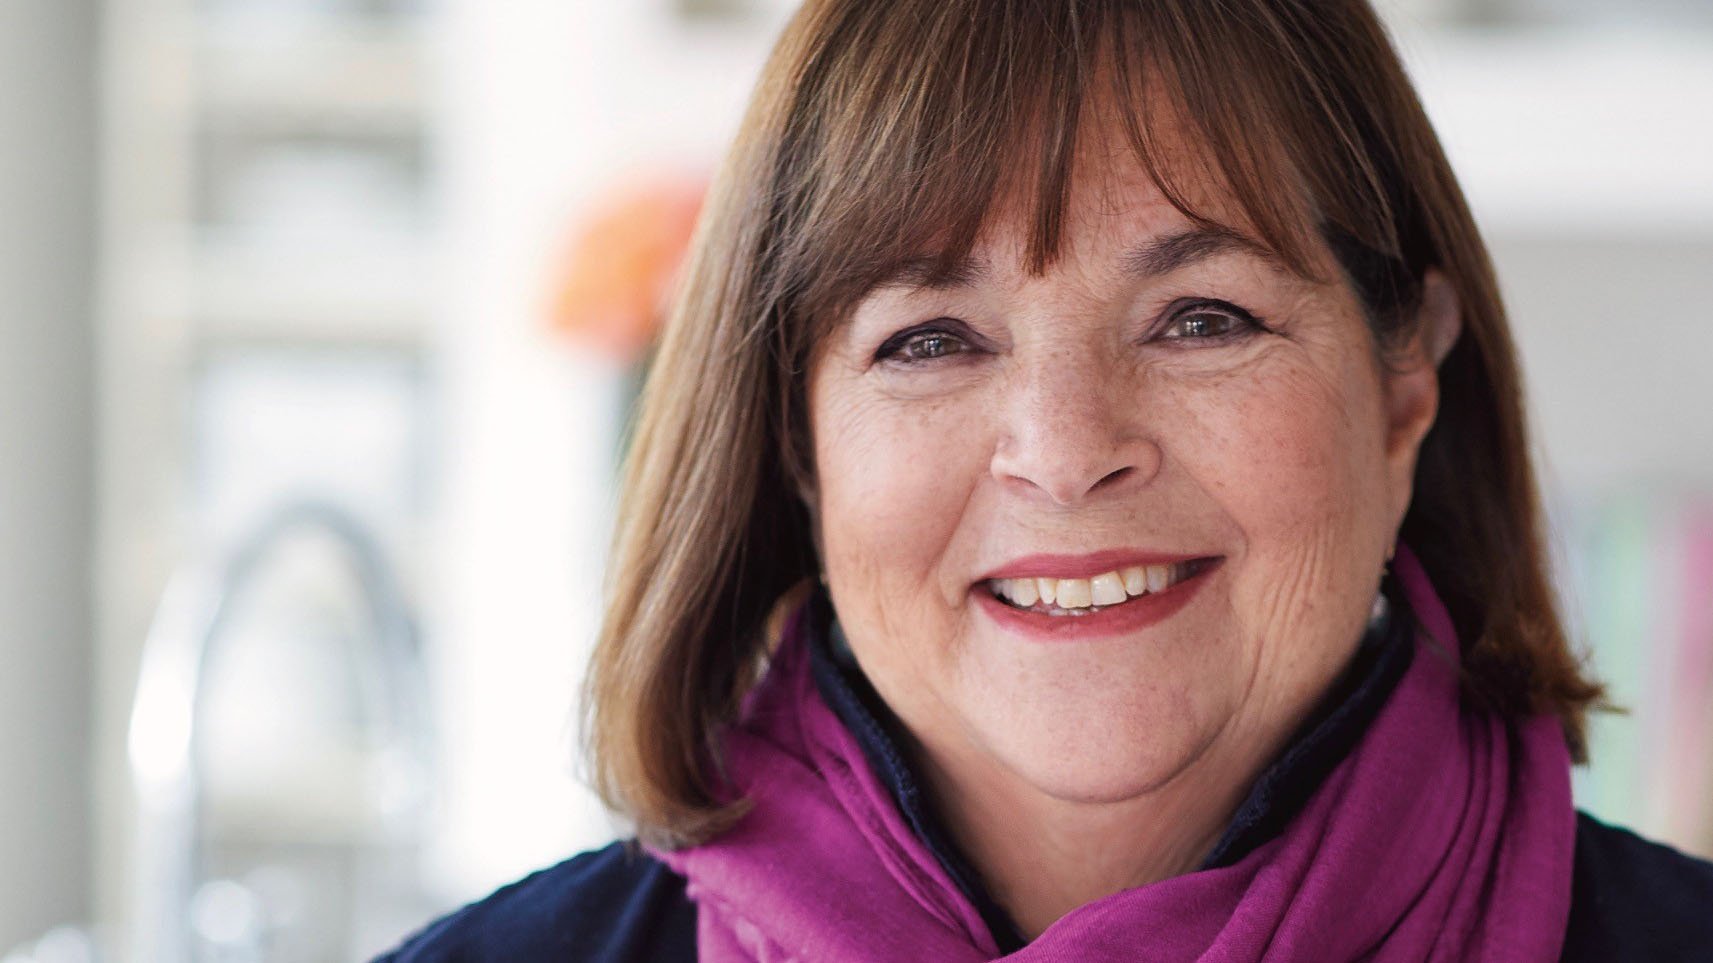 Ina Garten - Author of Modern Comfort Food. Photo by by Quentin Bacon